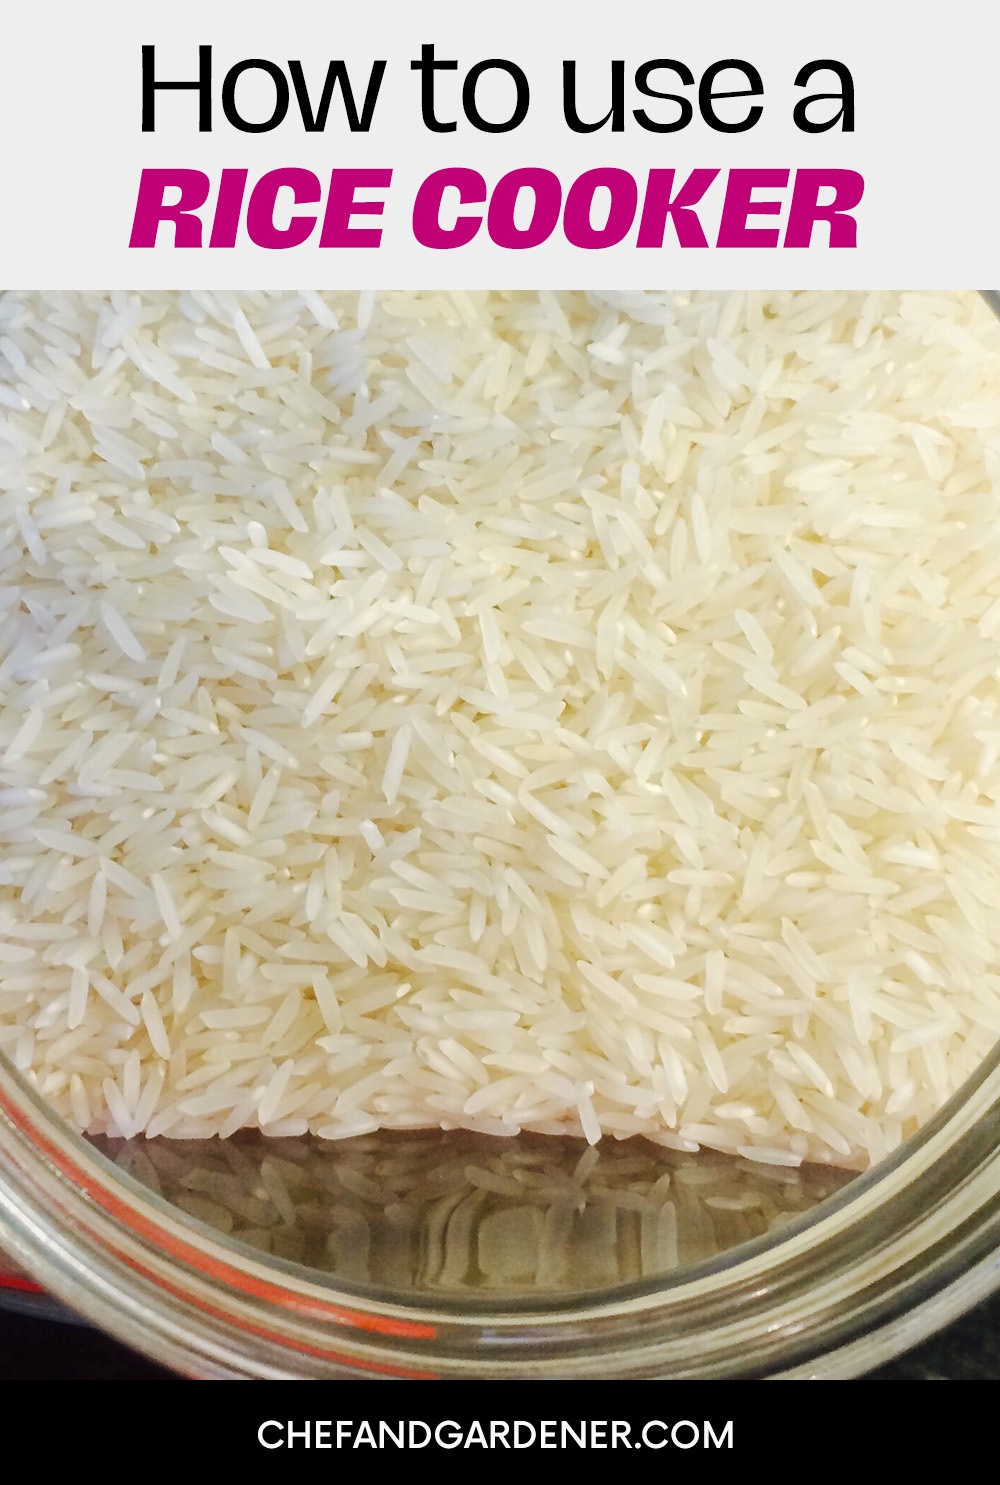 rice cooker usage made easy